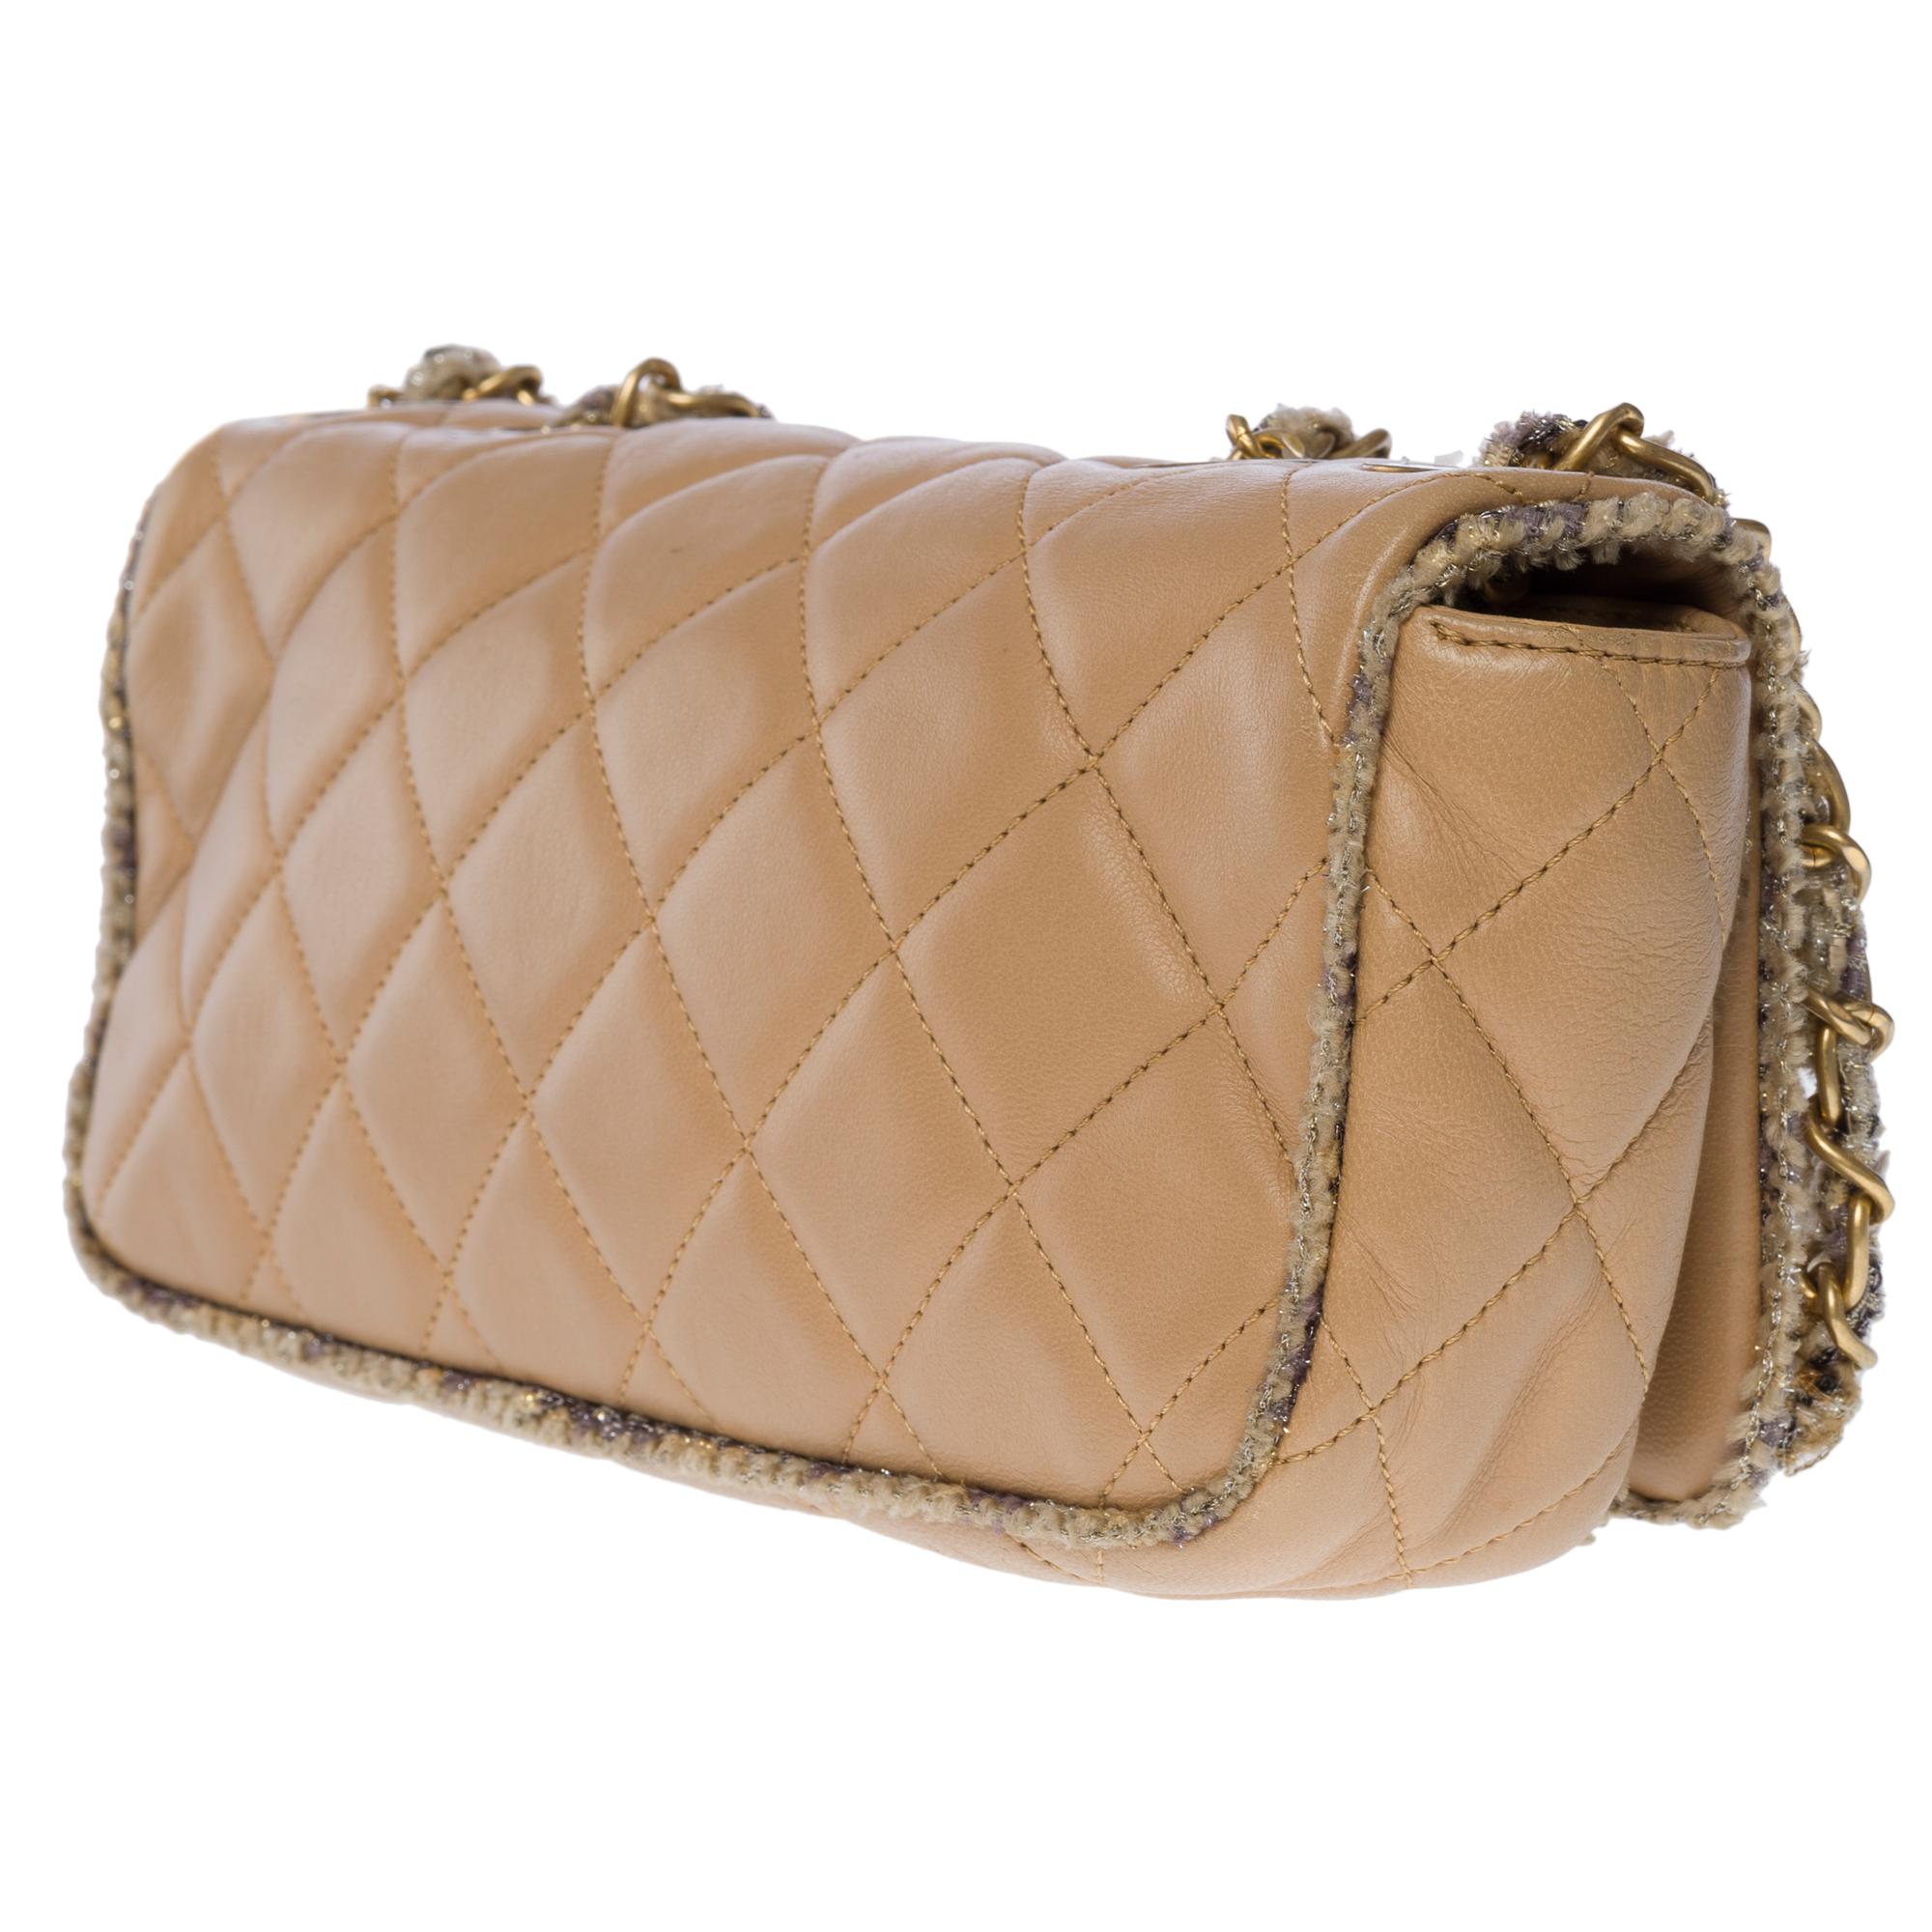 Rare limited edition Chanel Full flap shoulder bag in beige quilted lambskin, GHW For Sale 1